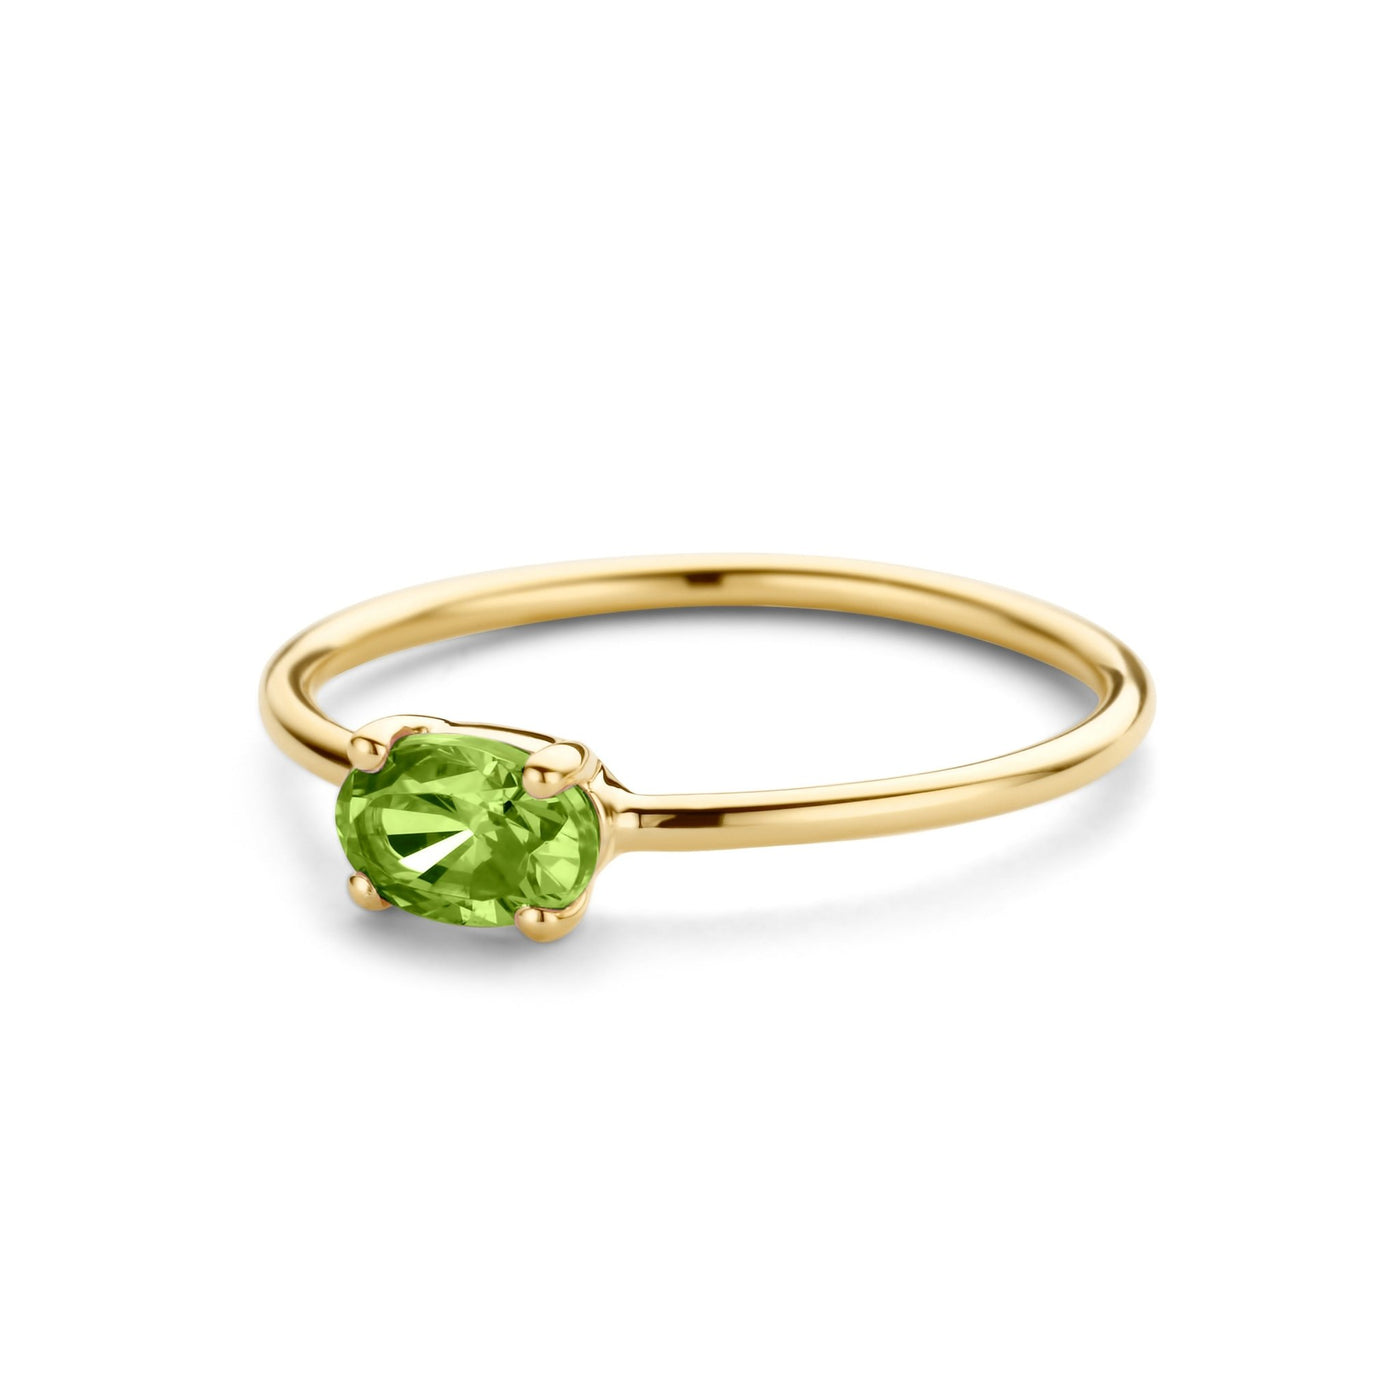 Oval Birthstone Ring - Olivia for Kids